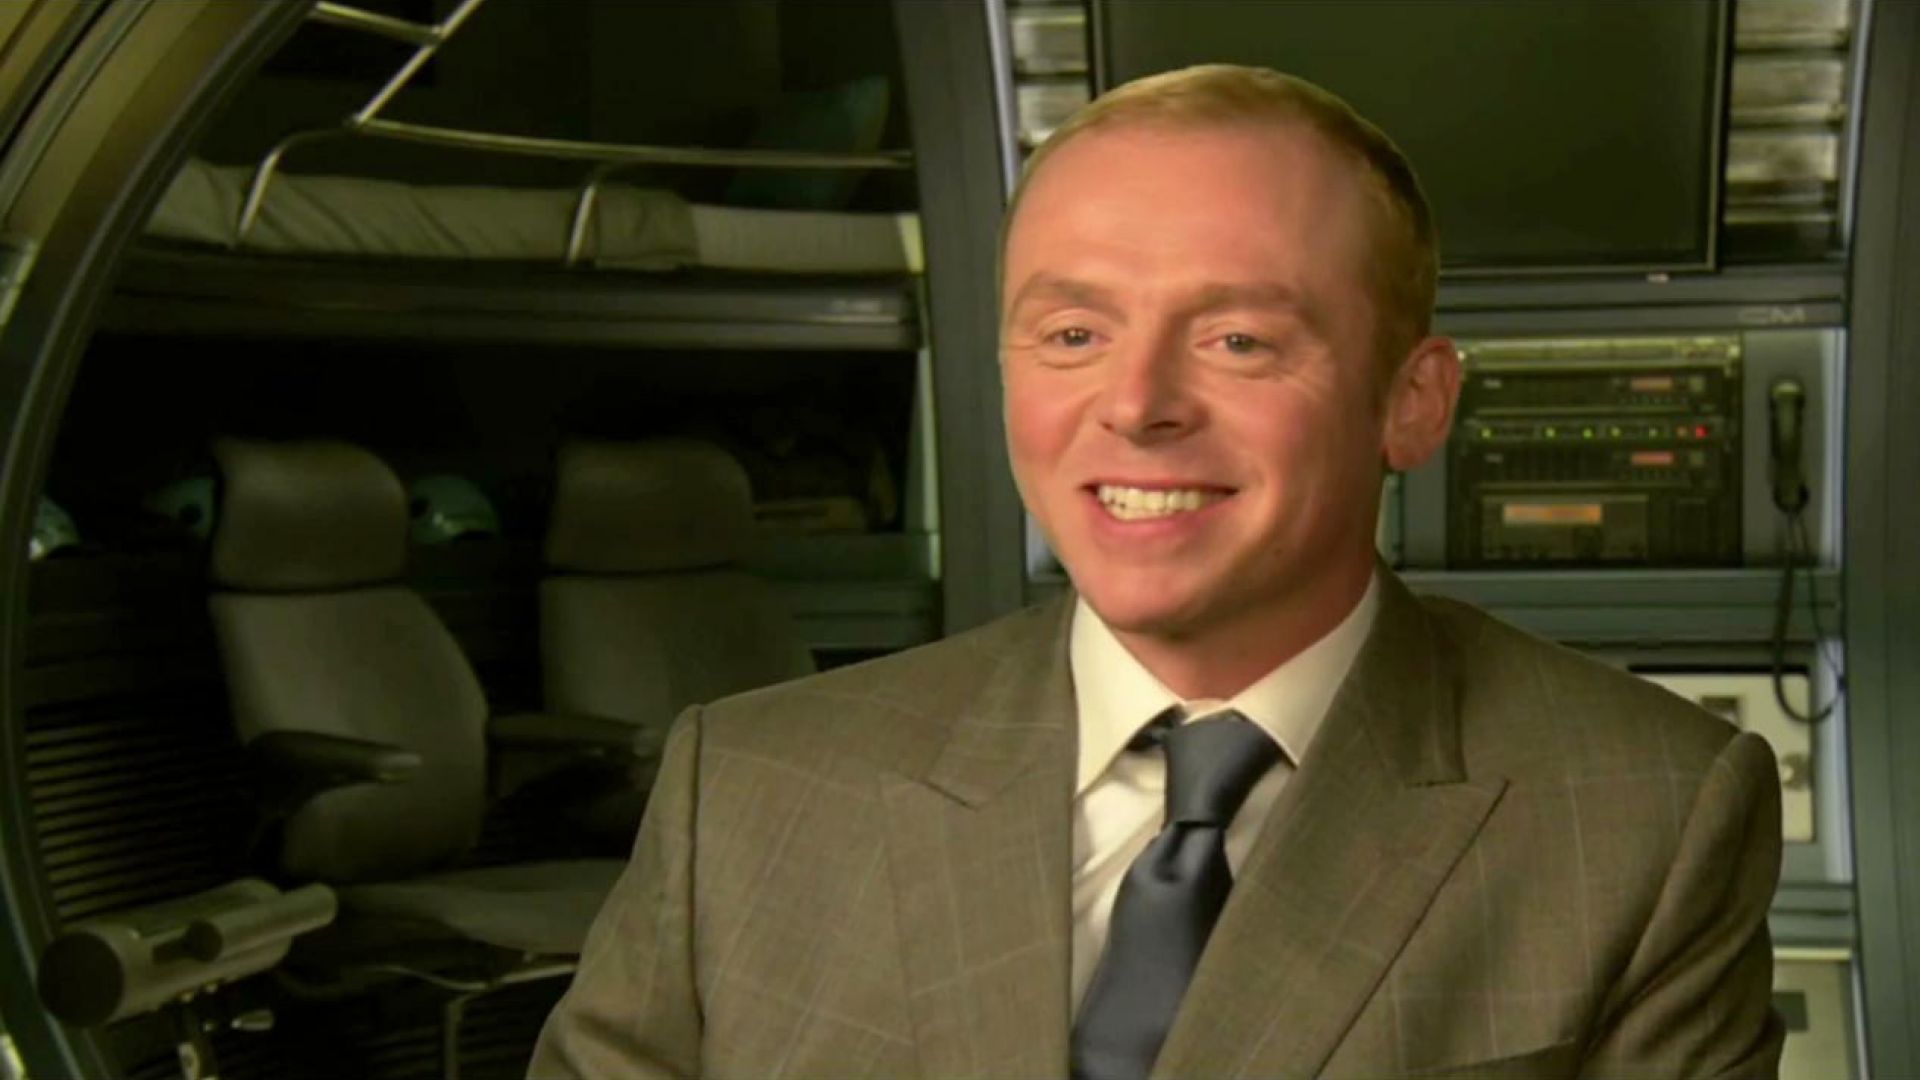 Simon Pegg on playing Benji the computer guy in Mission: Impossible 4